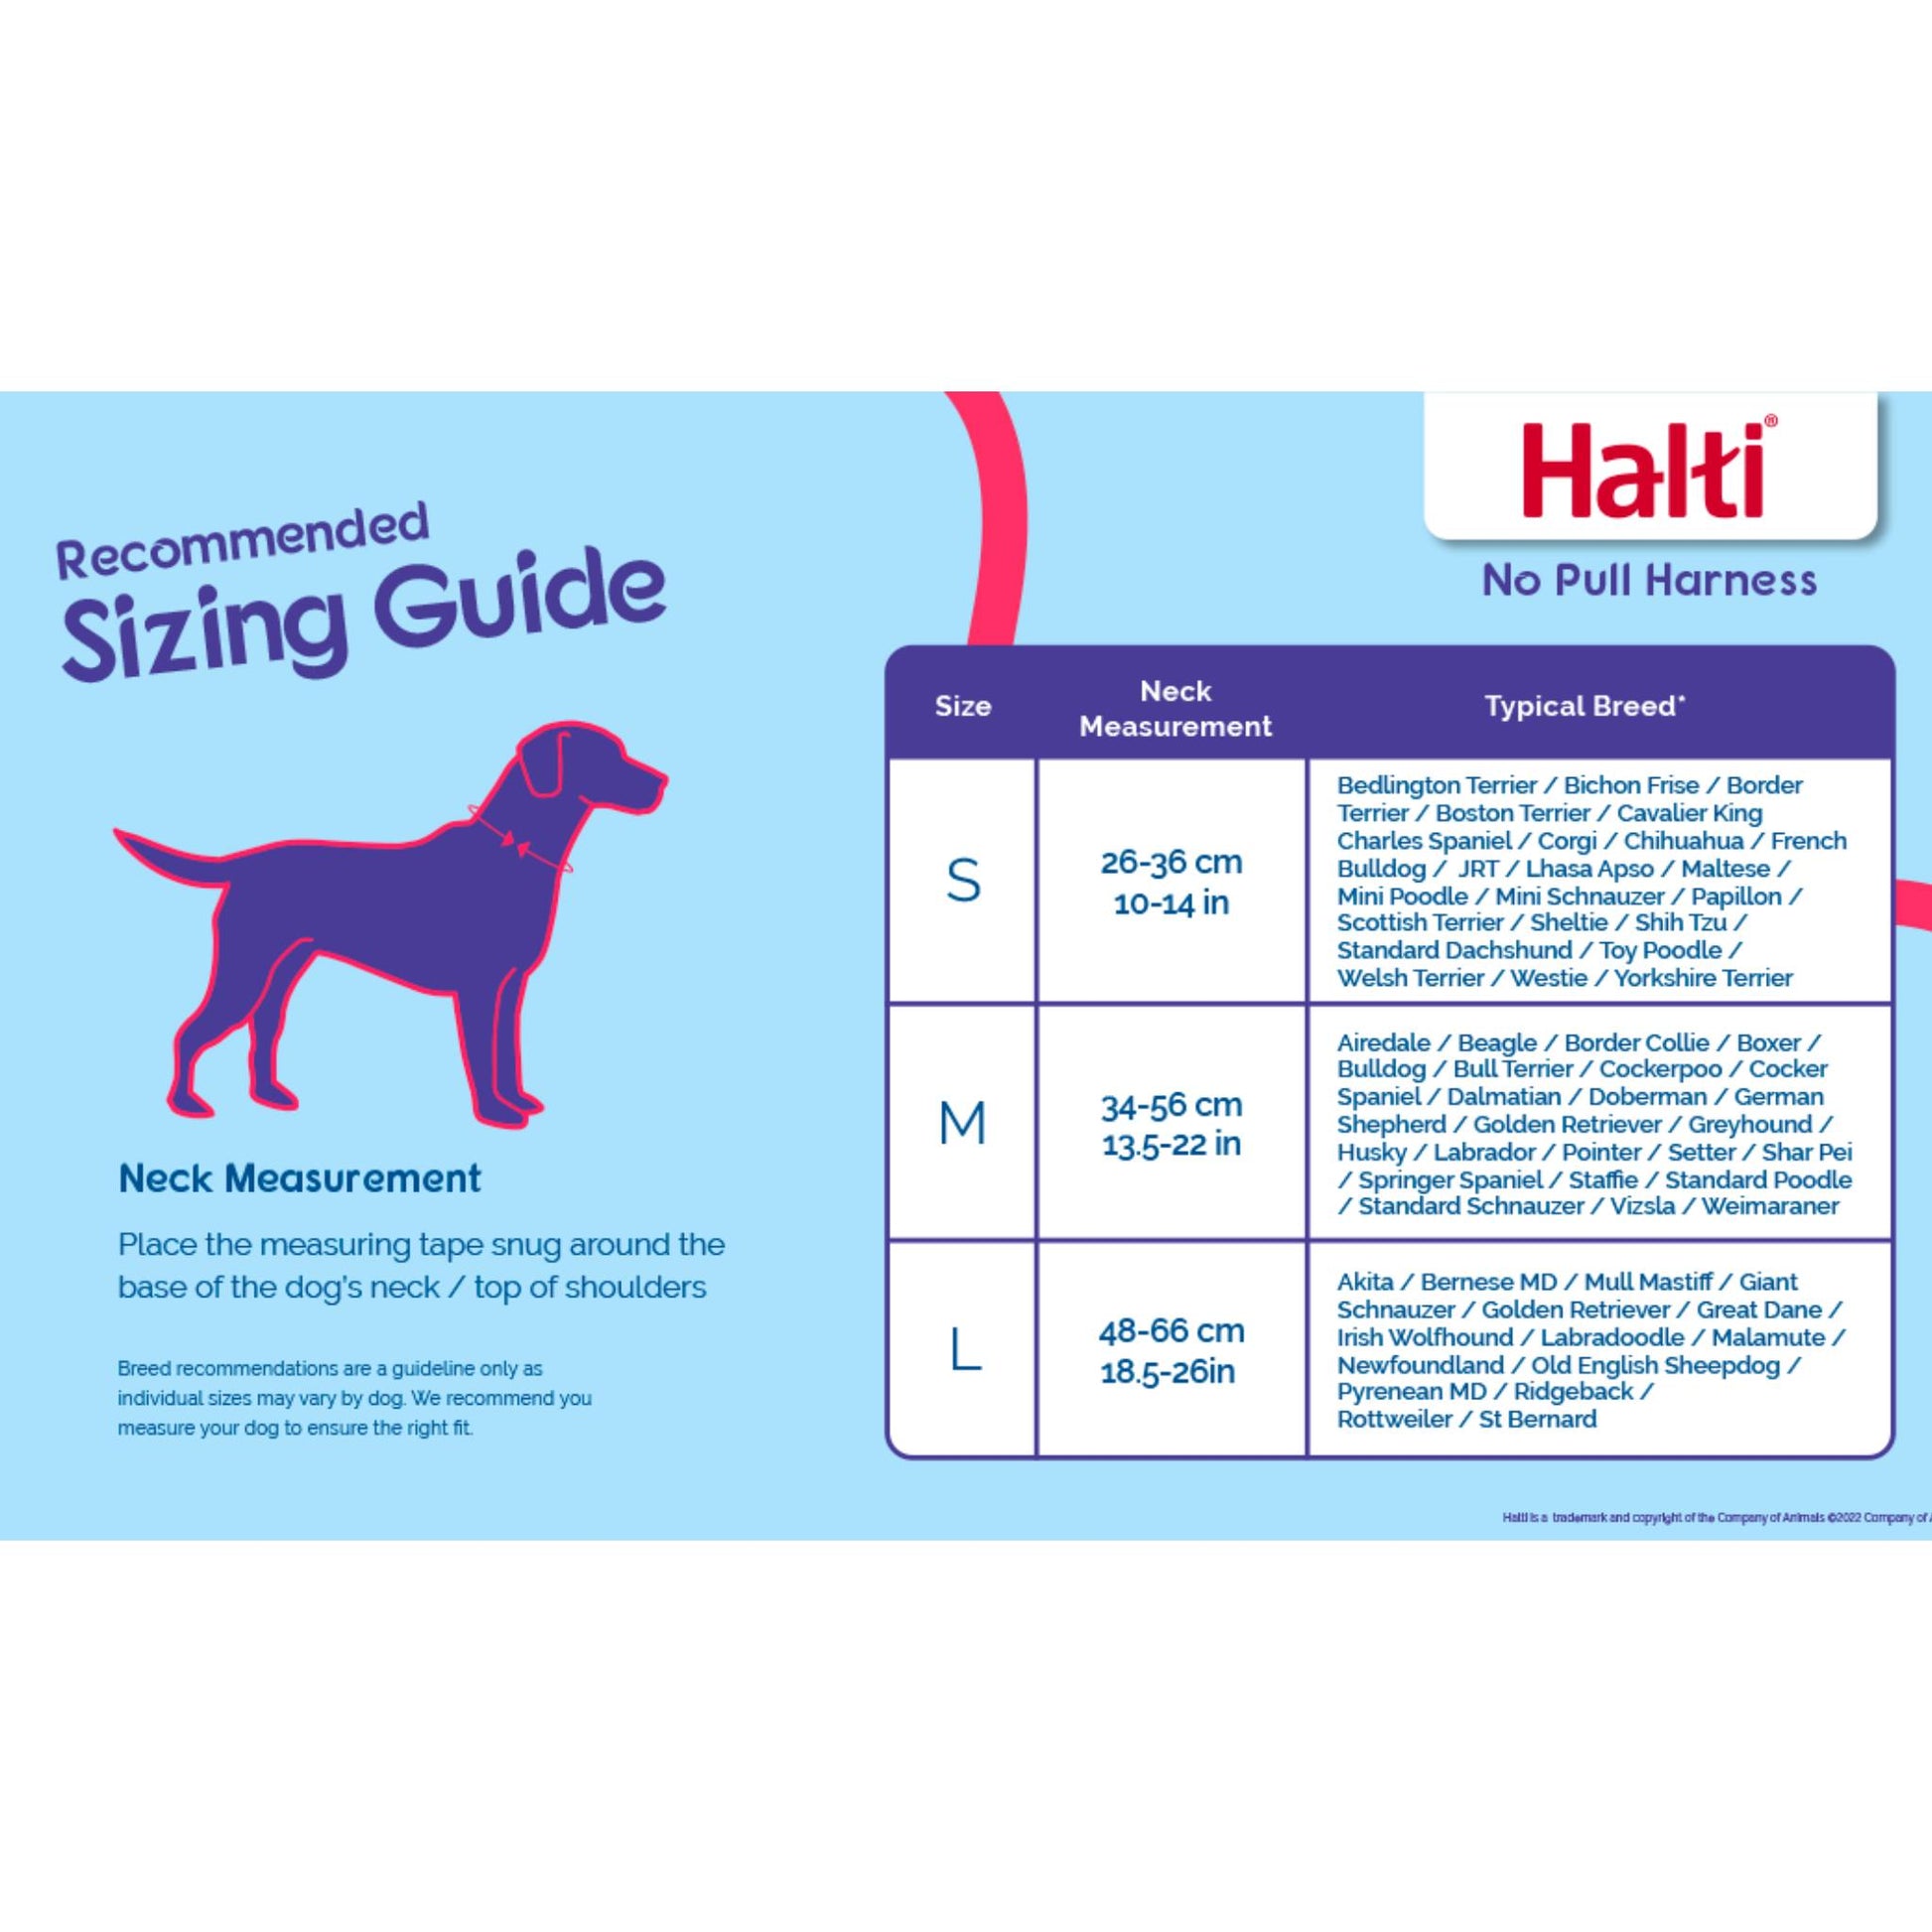 Sizing guide for Halti No Pull Harness